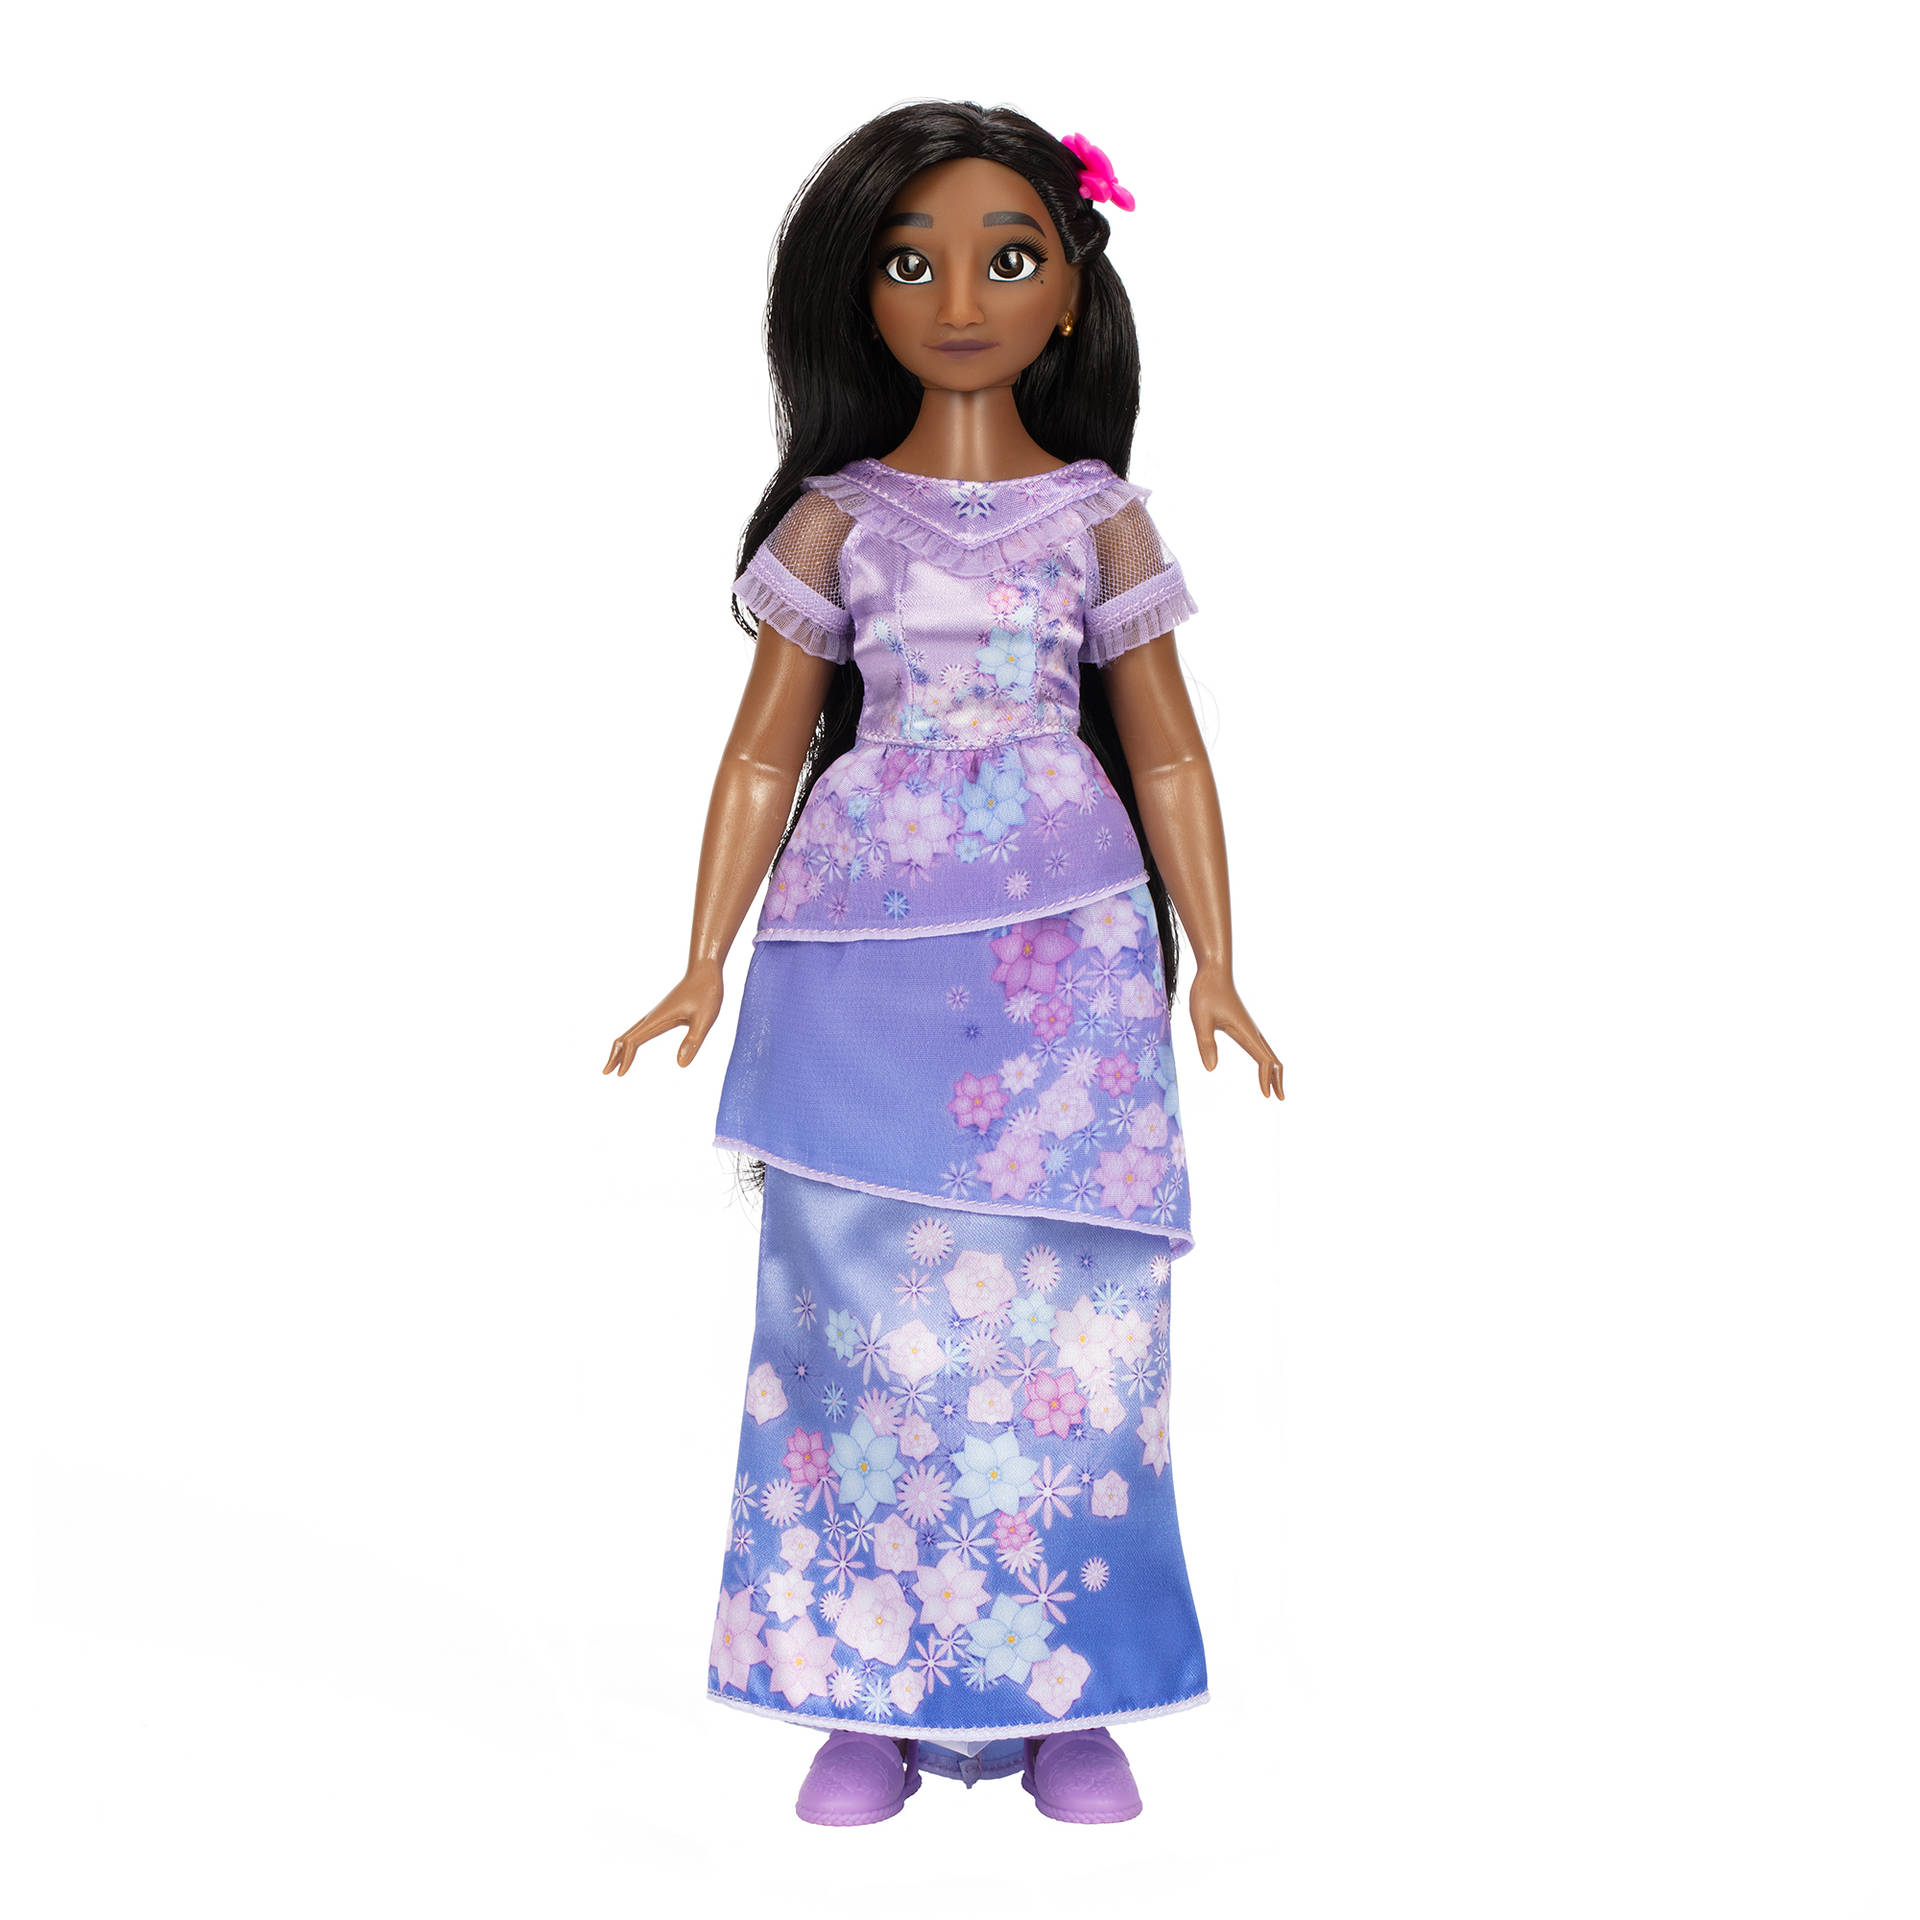 Caption: Isabela Madrigal - The Doll Version Of The Enchanting Disney Character